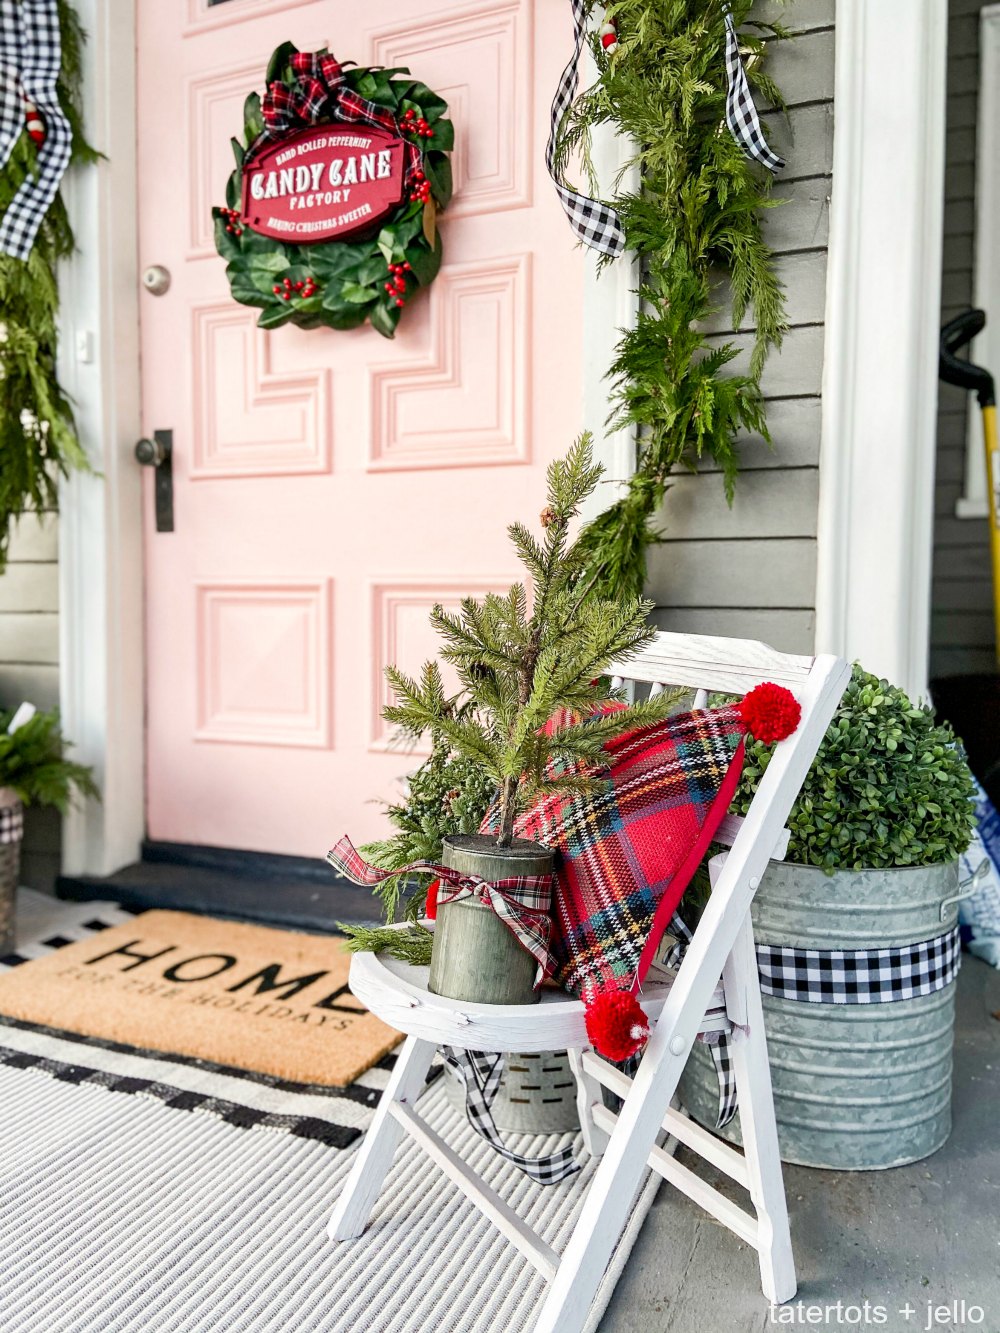 Holiday Home Tour - Festive Porch and Entry! Easy ways to add holiday cheer to your front porch and entryway! 